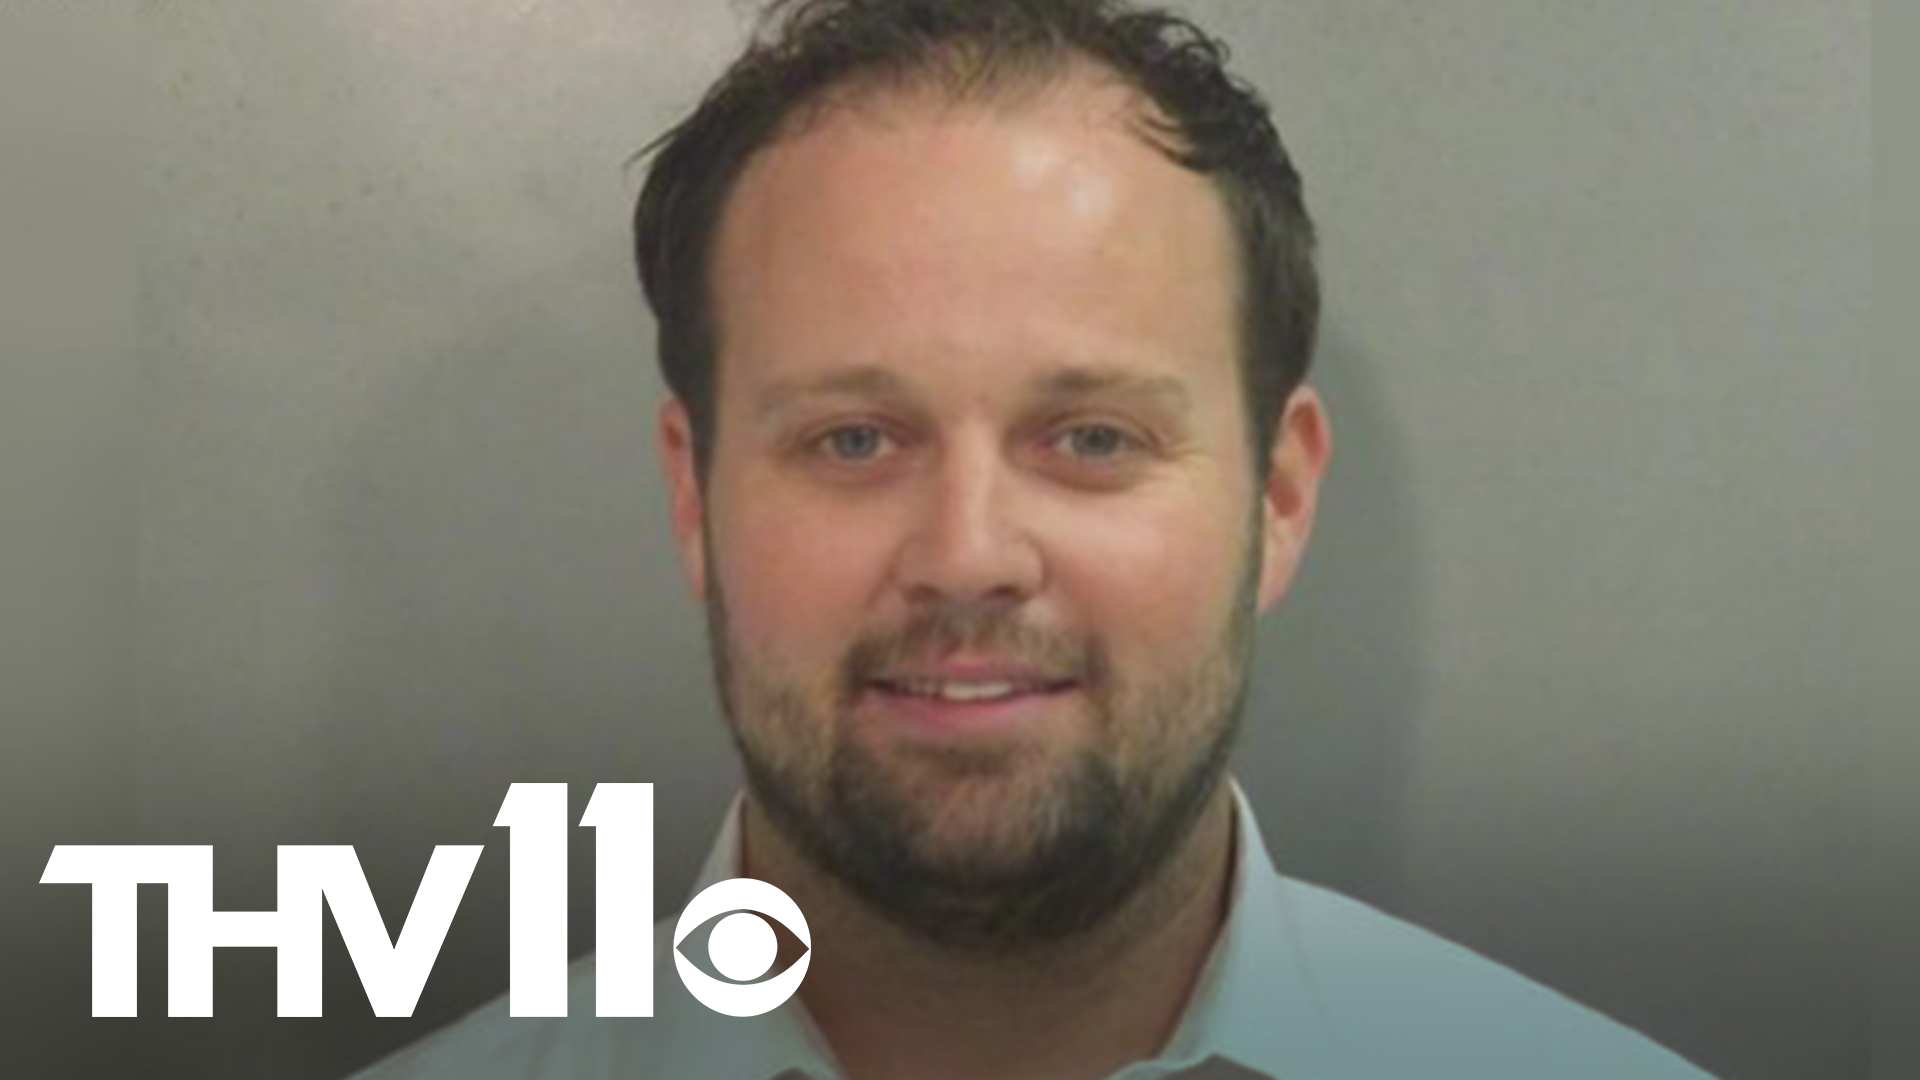 A judge is getting set to decide later this week how much time Josh Duggar will be imprisoned for.